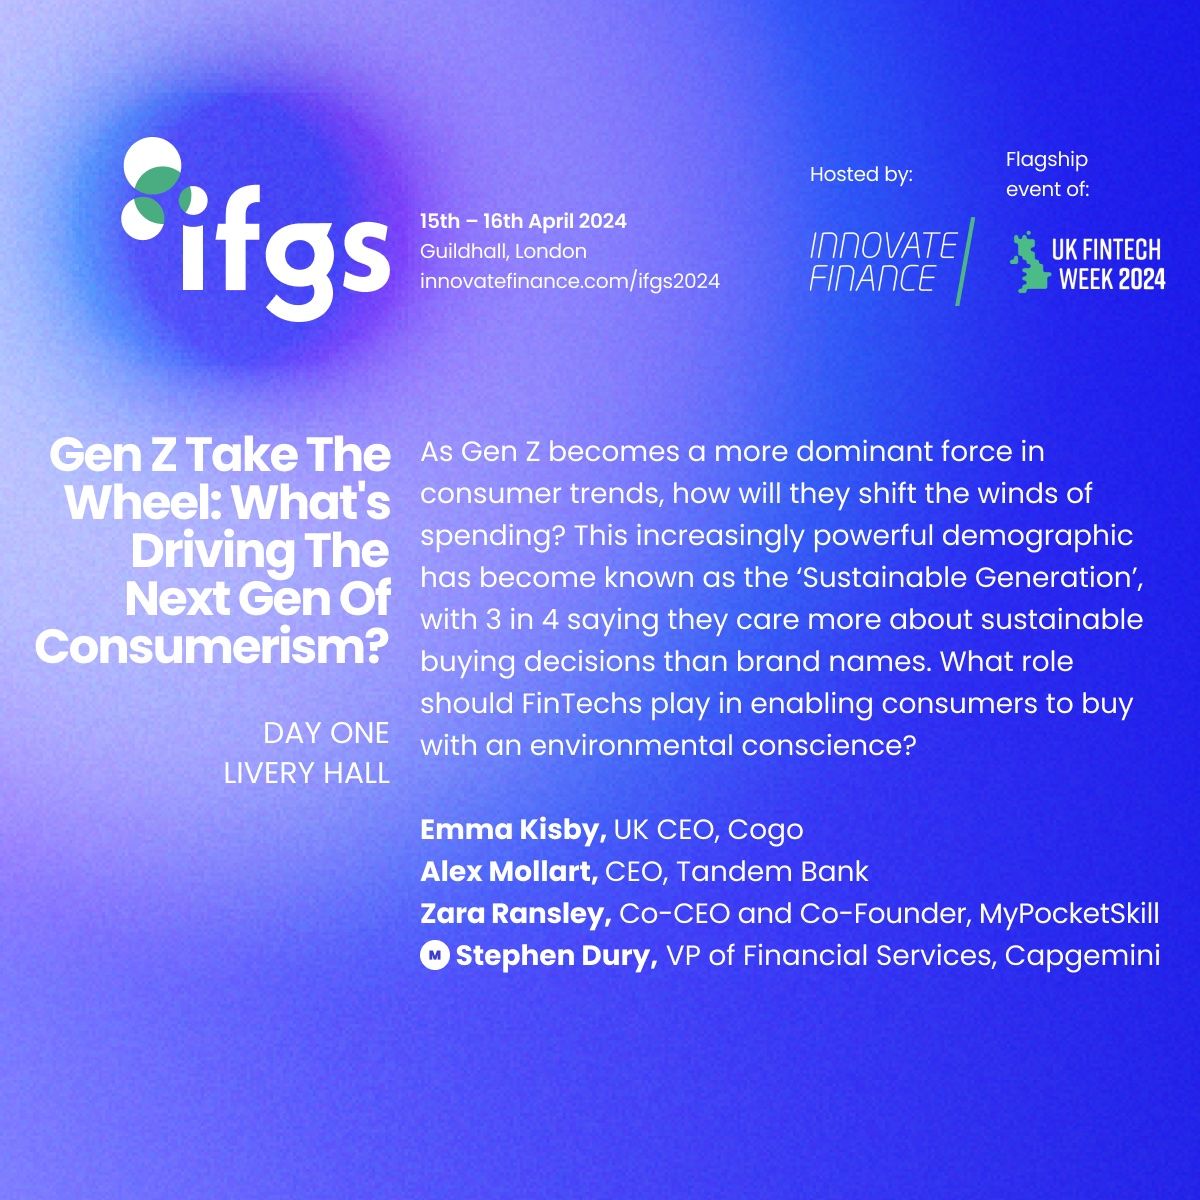 Our very own @zara_ransley will chatting #consumerism, #sustainability and #GenZ at next week's #InnovateFinanceGlobalSummit.

Excited to be sharing the floor with Emma Kisby @cogo, Alex Mollart @Tandem_Bank  & Stephen Dury @CapGemini.  

#IFGS2024 #UKFinTechWeek